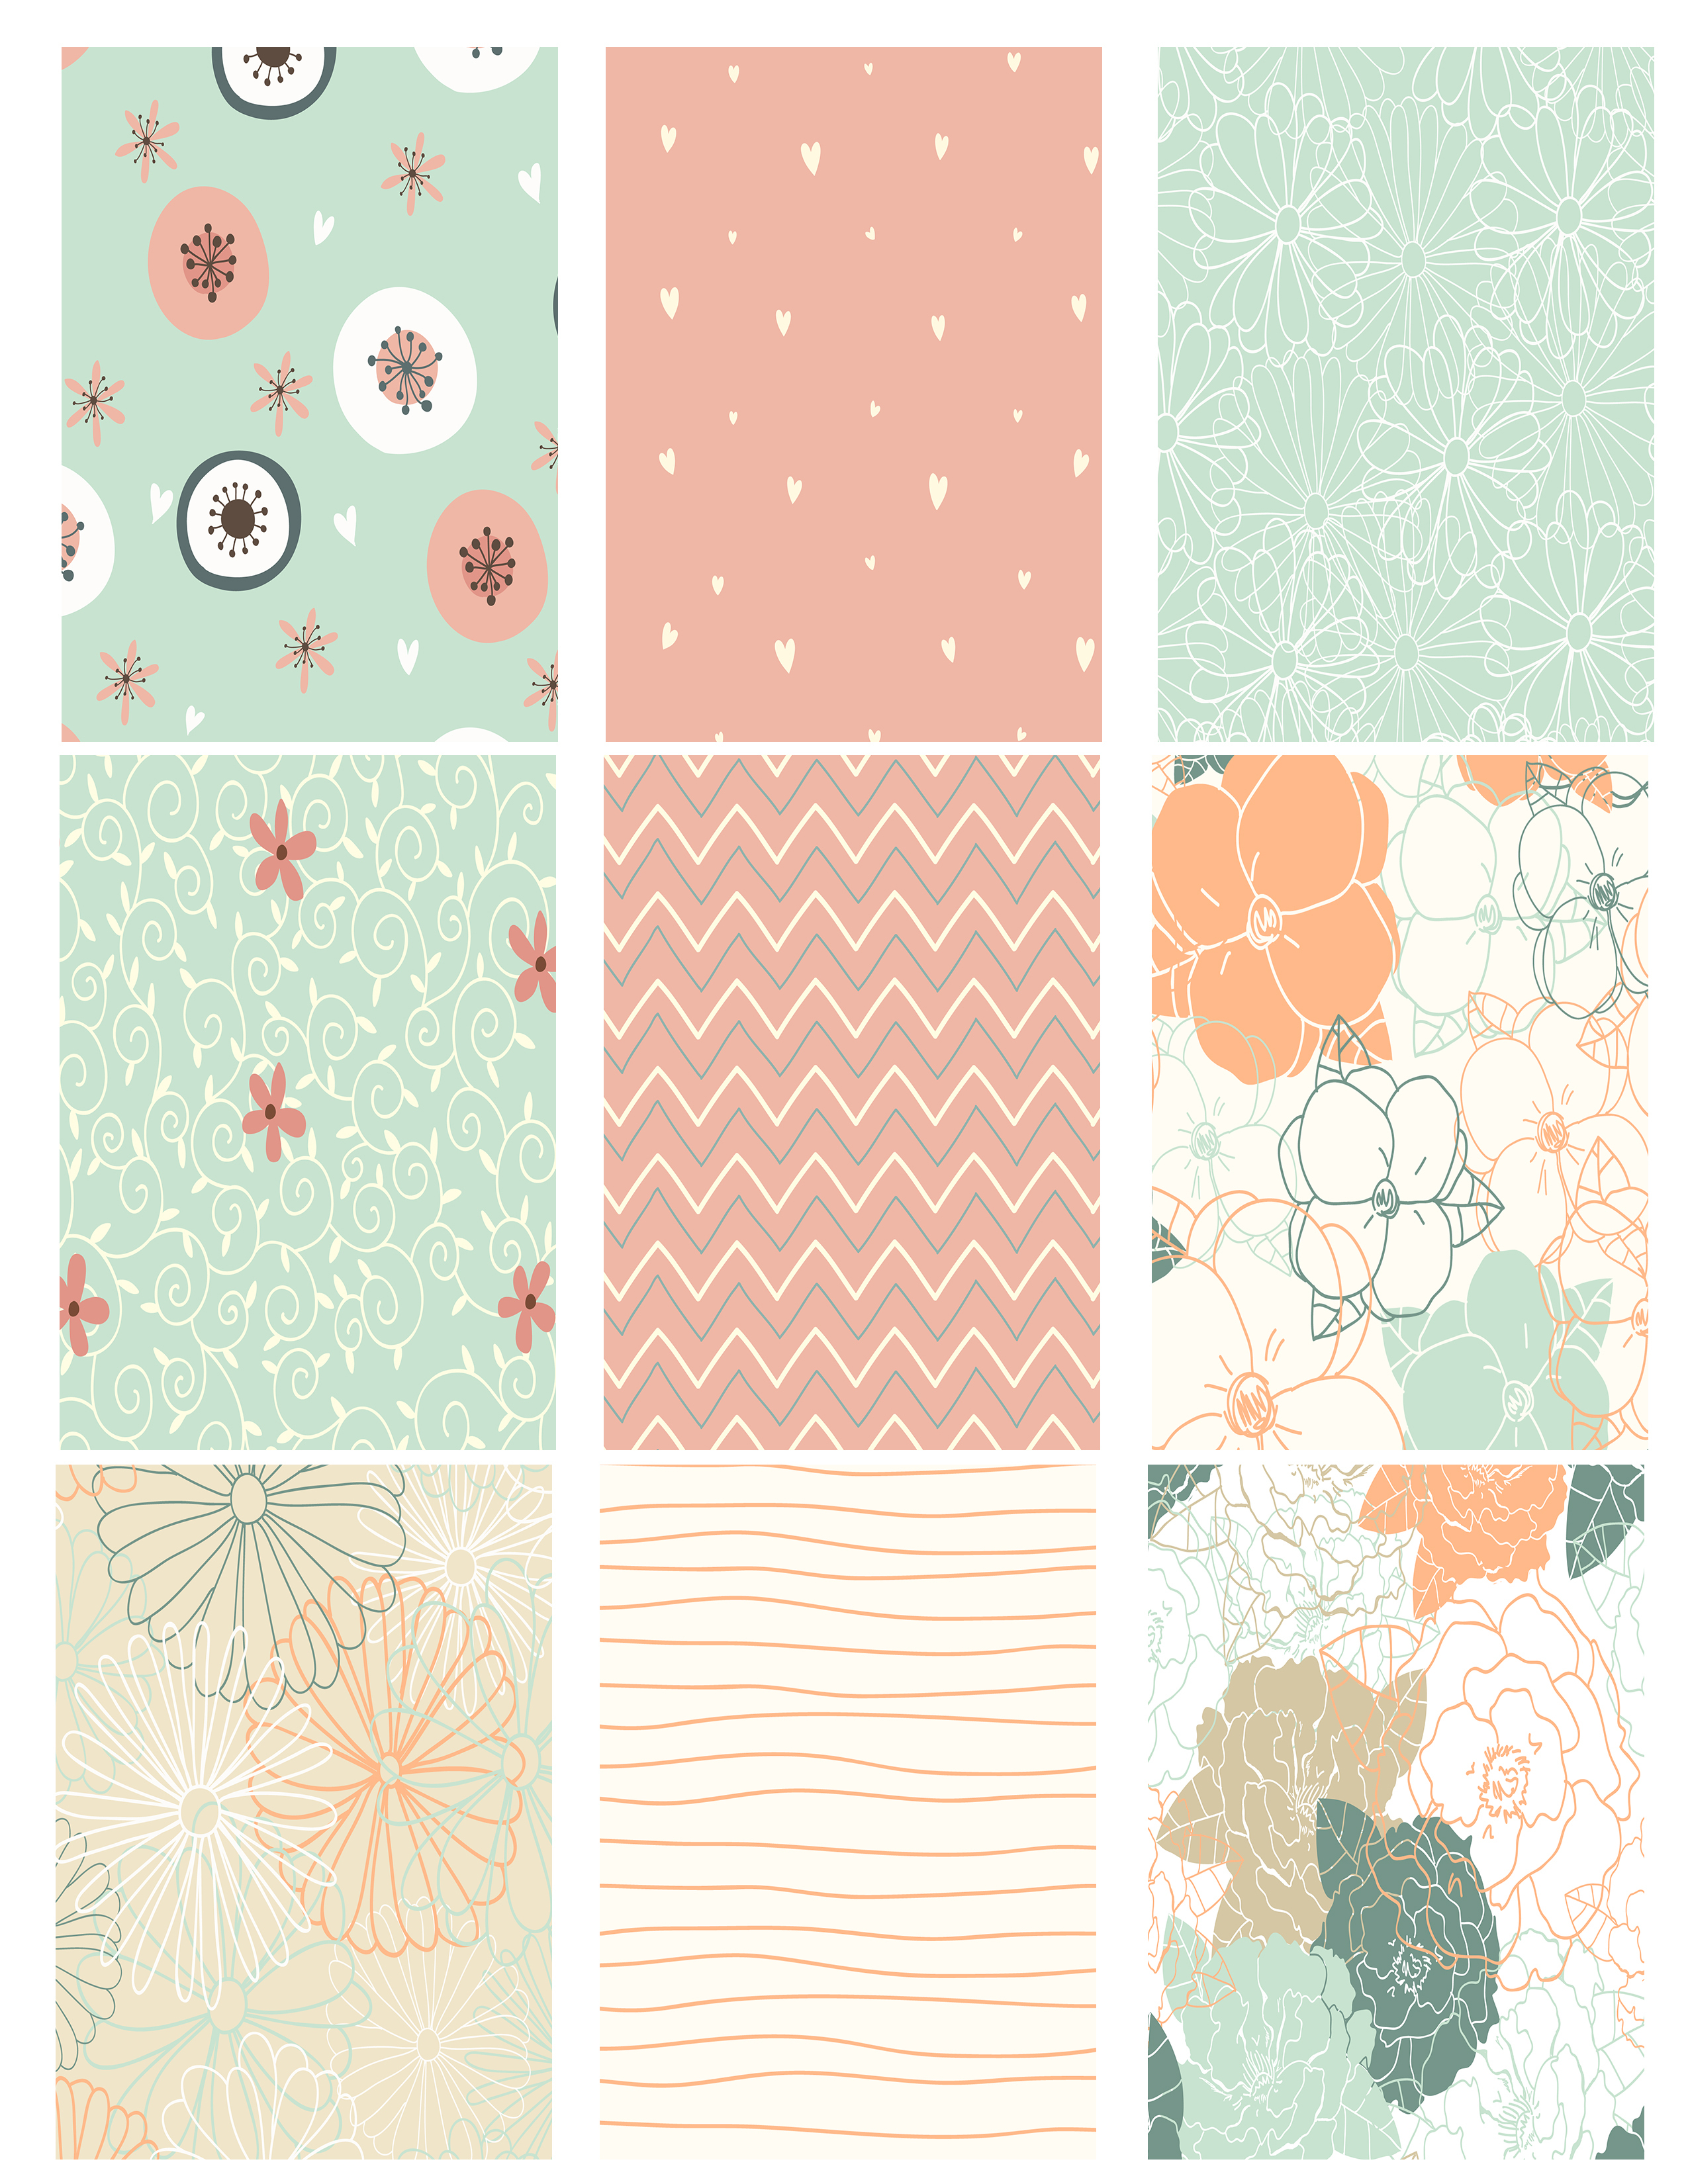 Printable Atc Background Collage Sheet - Whimsical Patterns - The - Free Printable Backgrounds